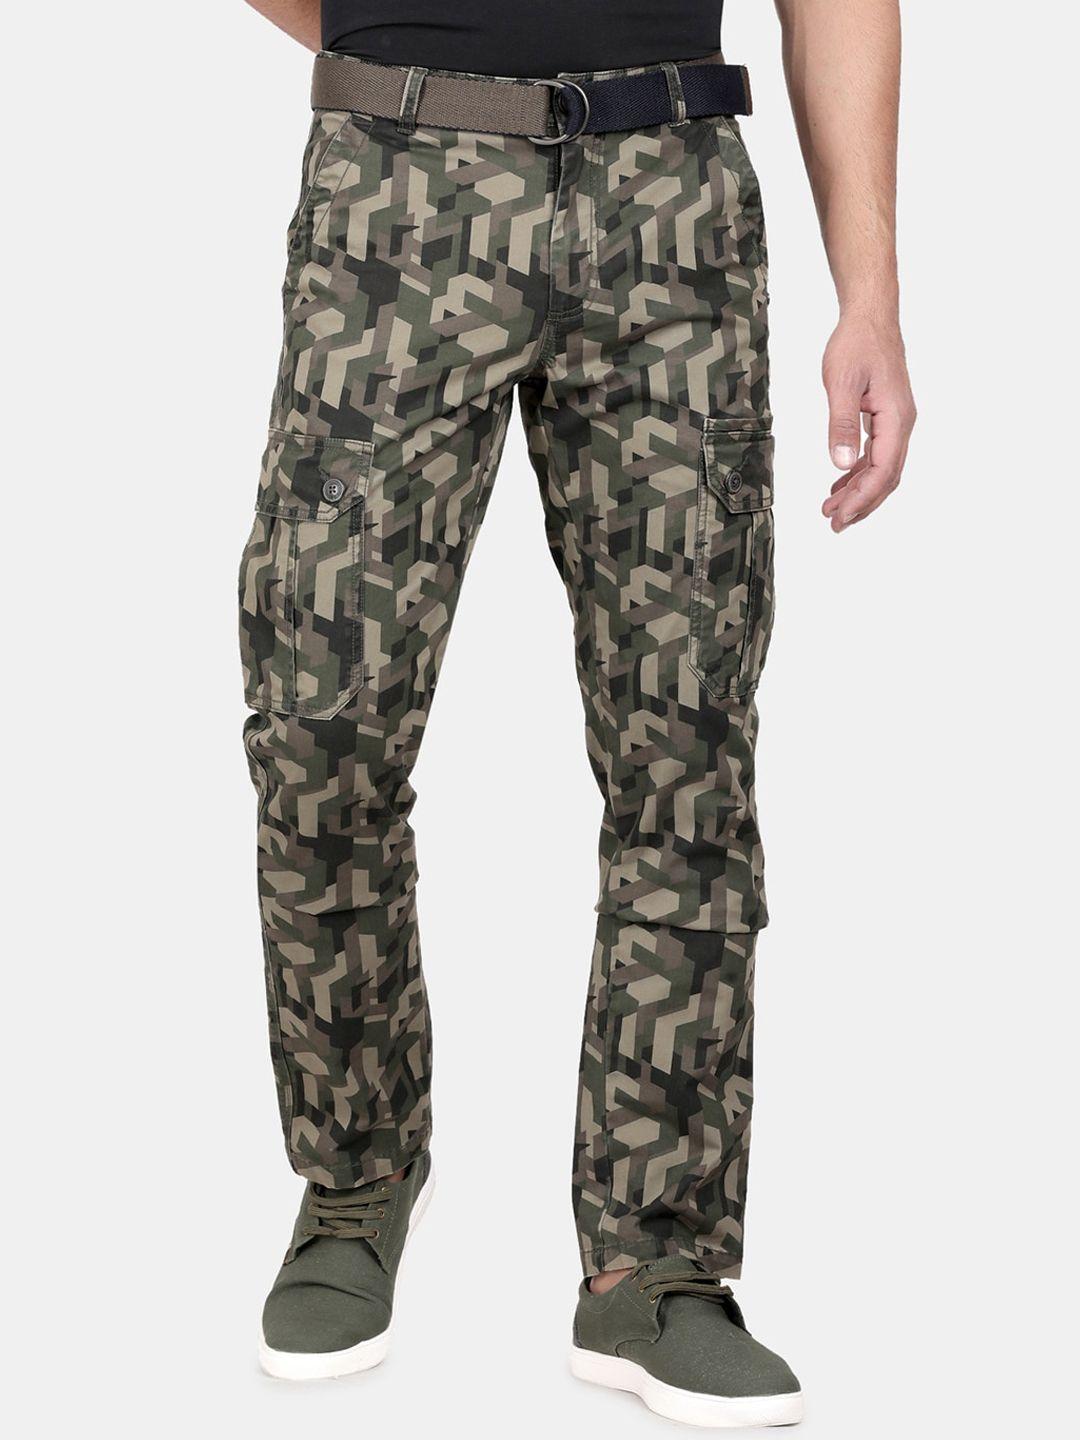 t-base men camouflage printed cotton easy wash mid-rise regular fit cargos trousers